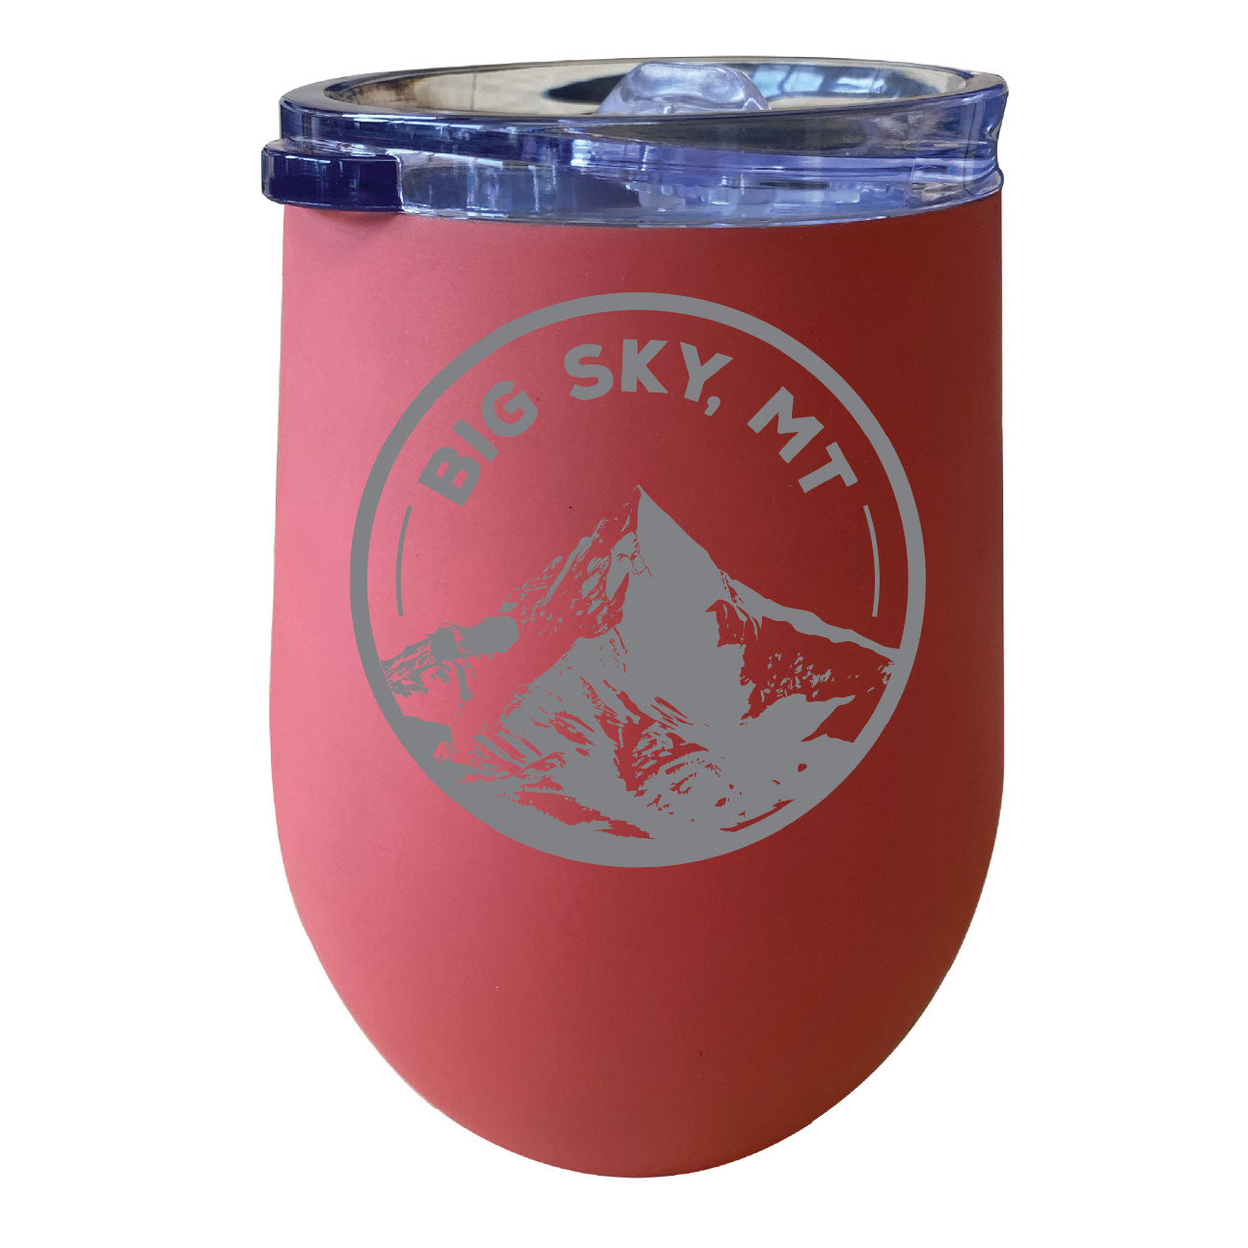 Big Sky Montana Souvenir 12 Oz Engraved Insulated Wine Stainless Steel Tumbler - Coral,,Single Unit